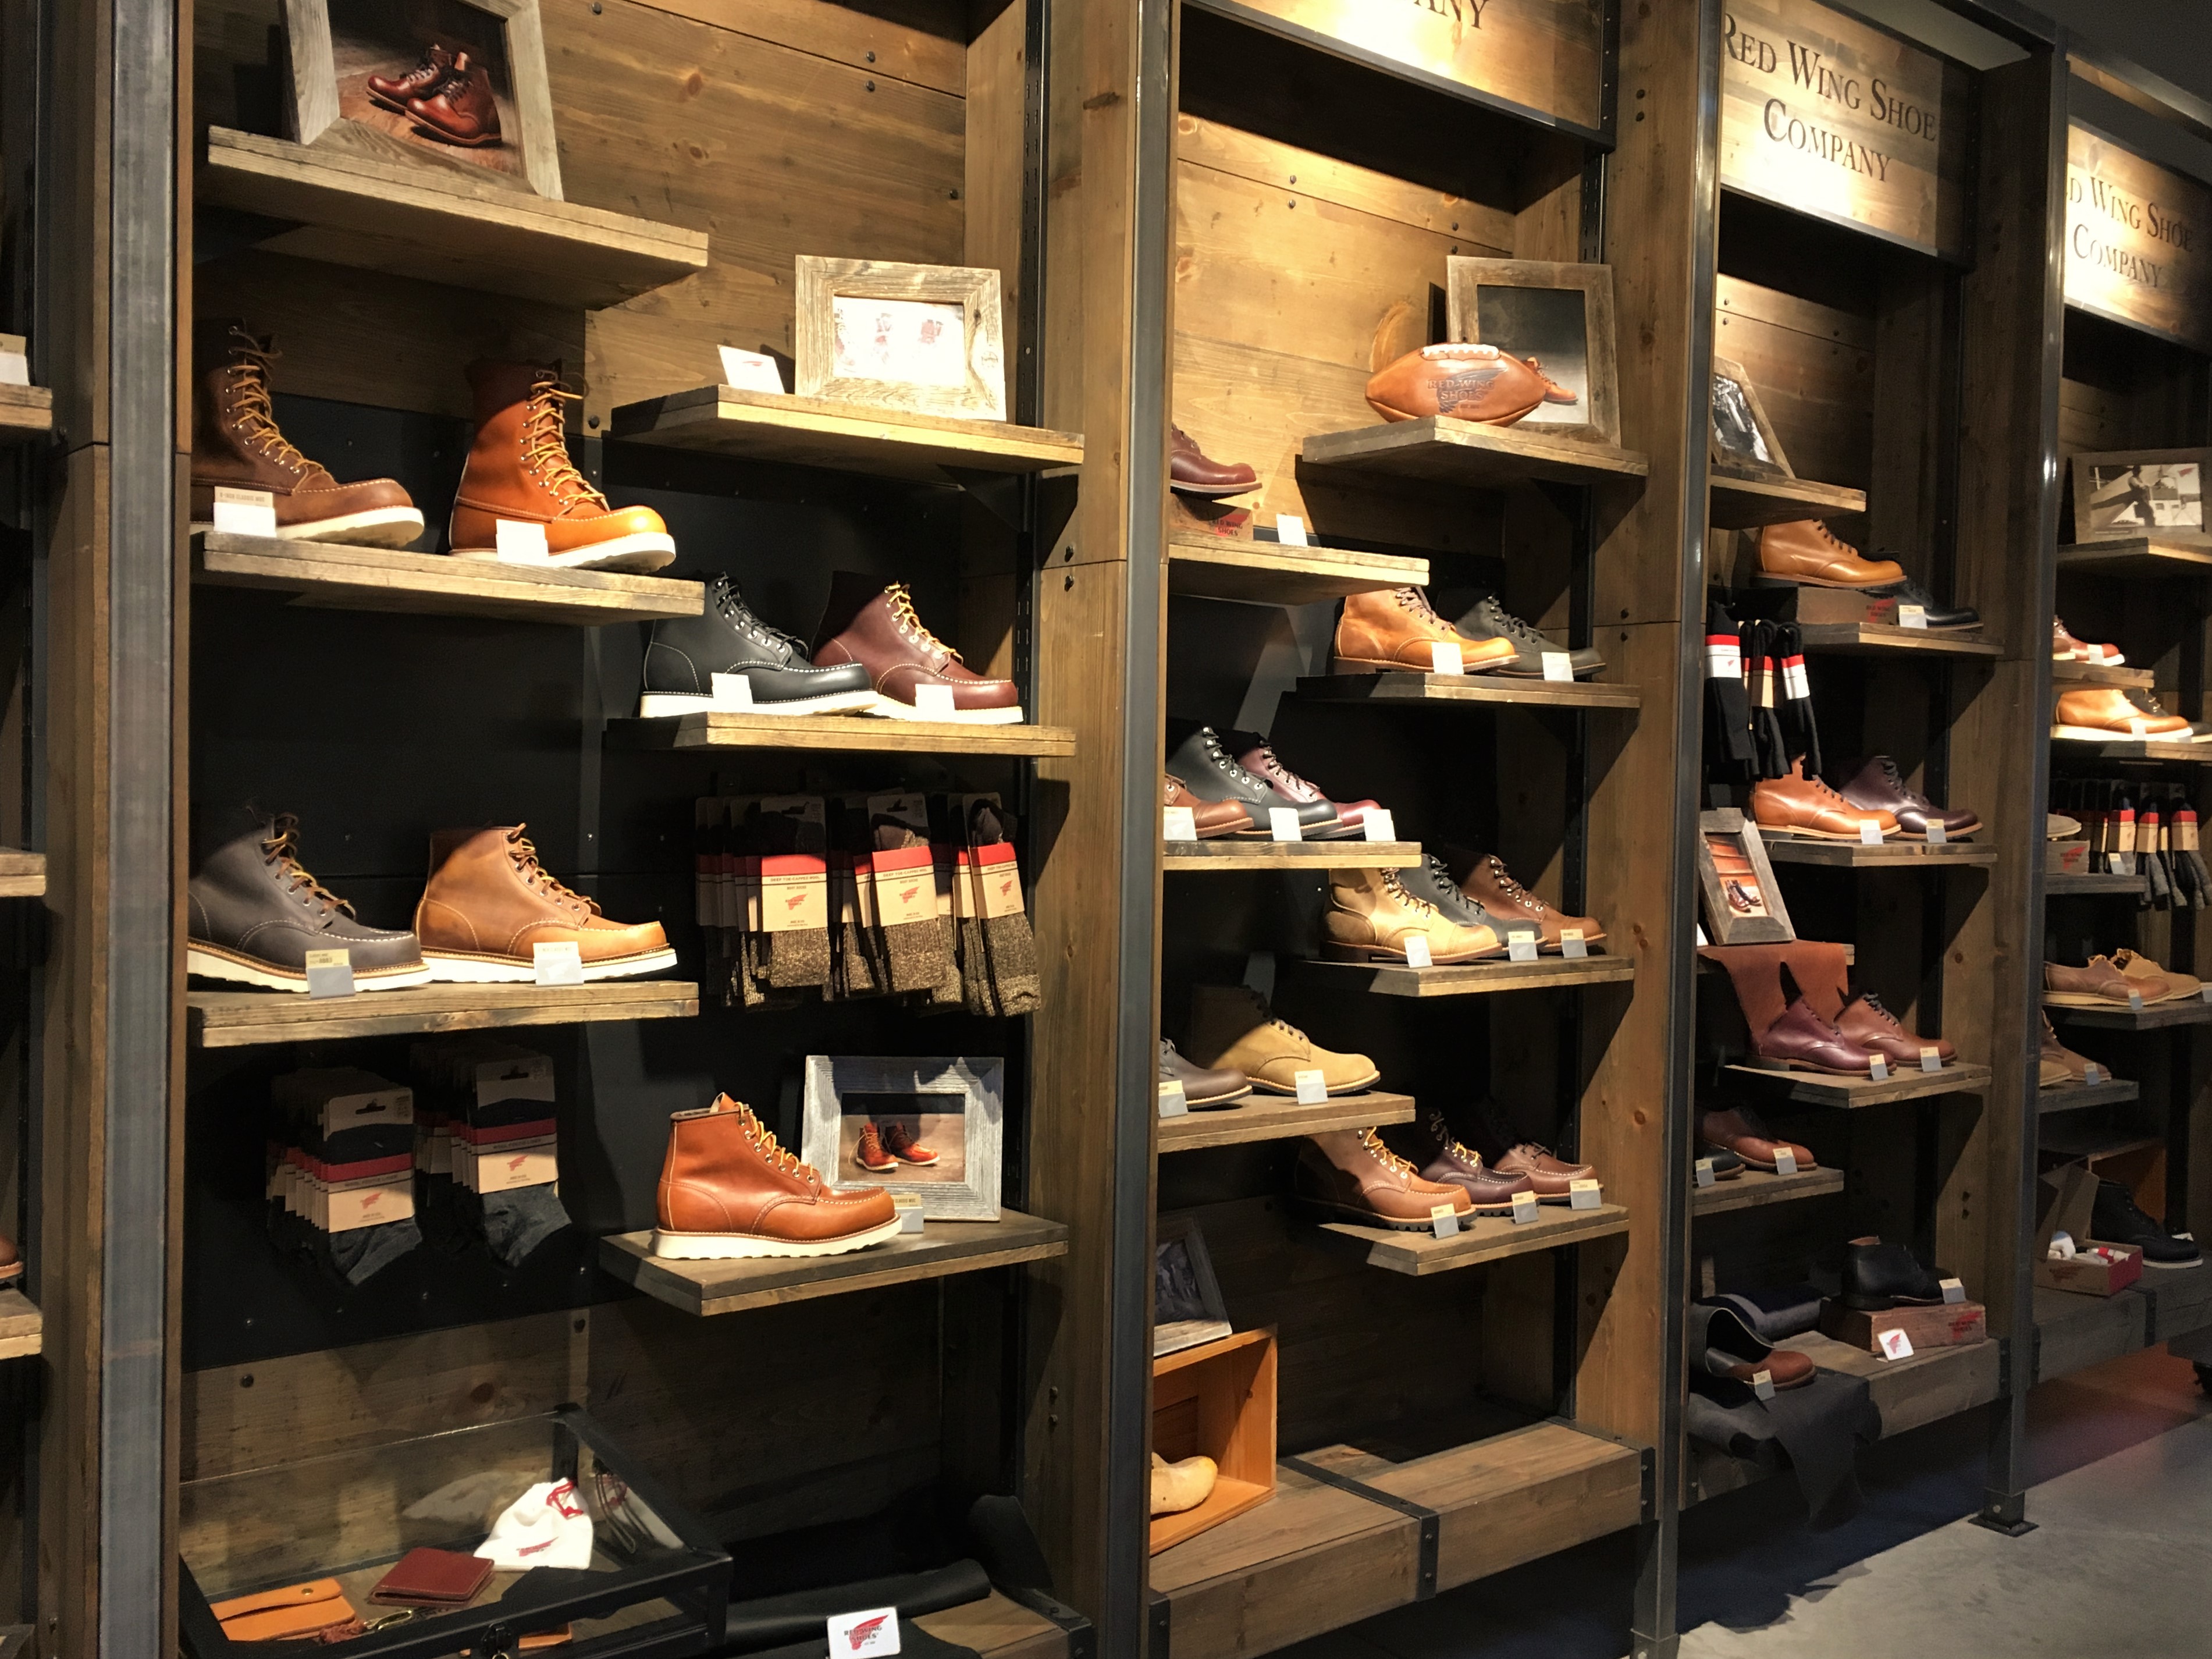 closest red wing store